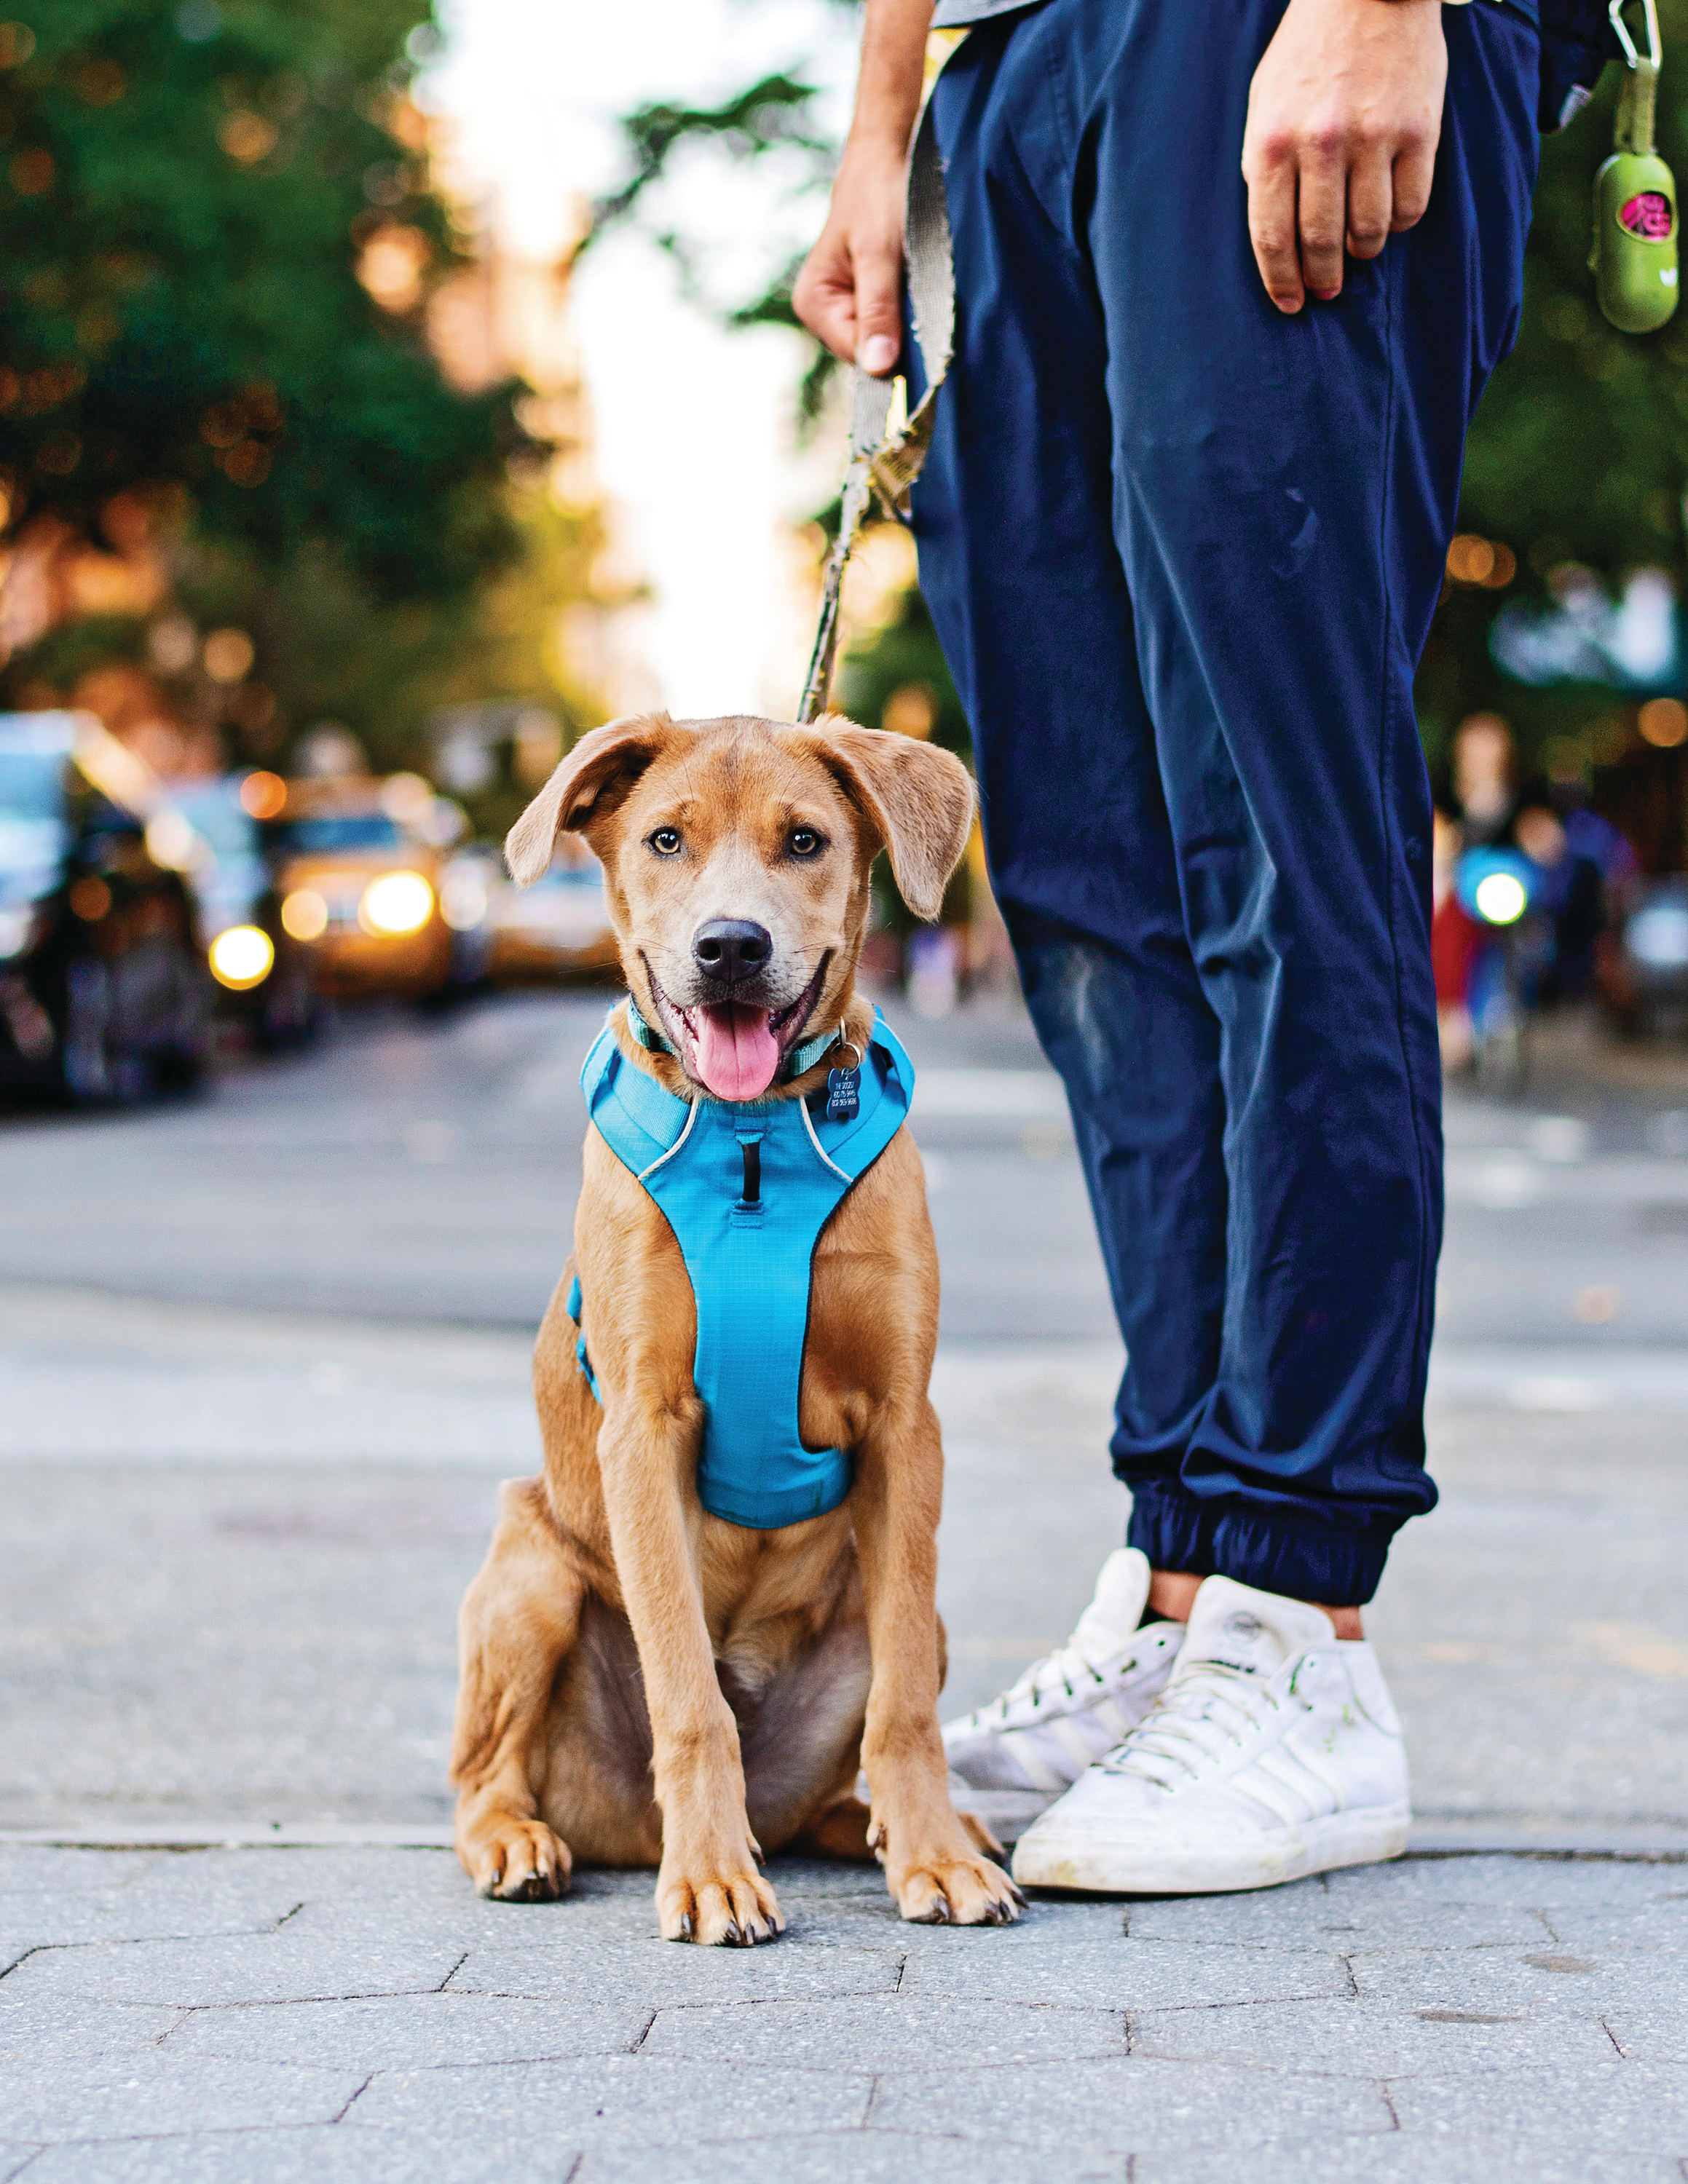 NYC pet Instagram accounts you need to follow